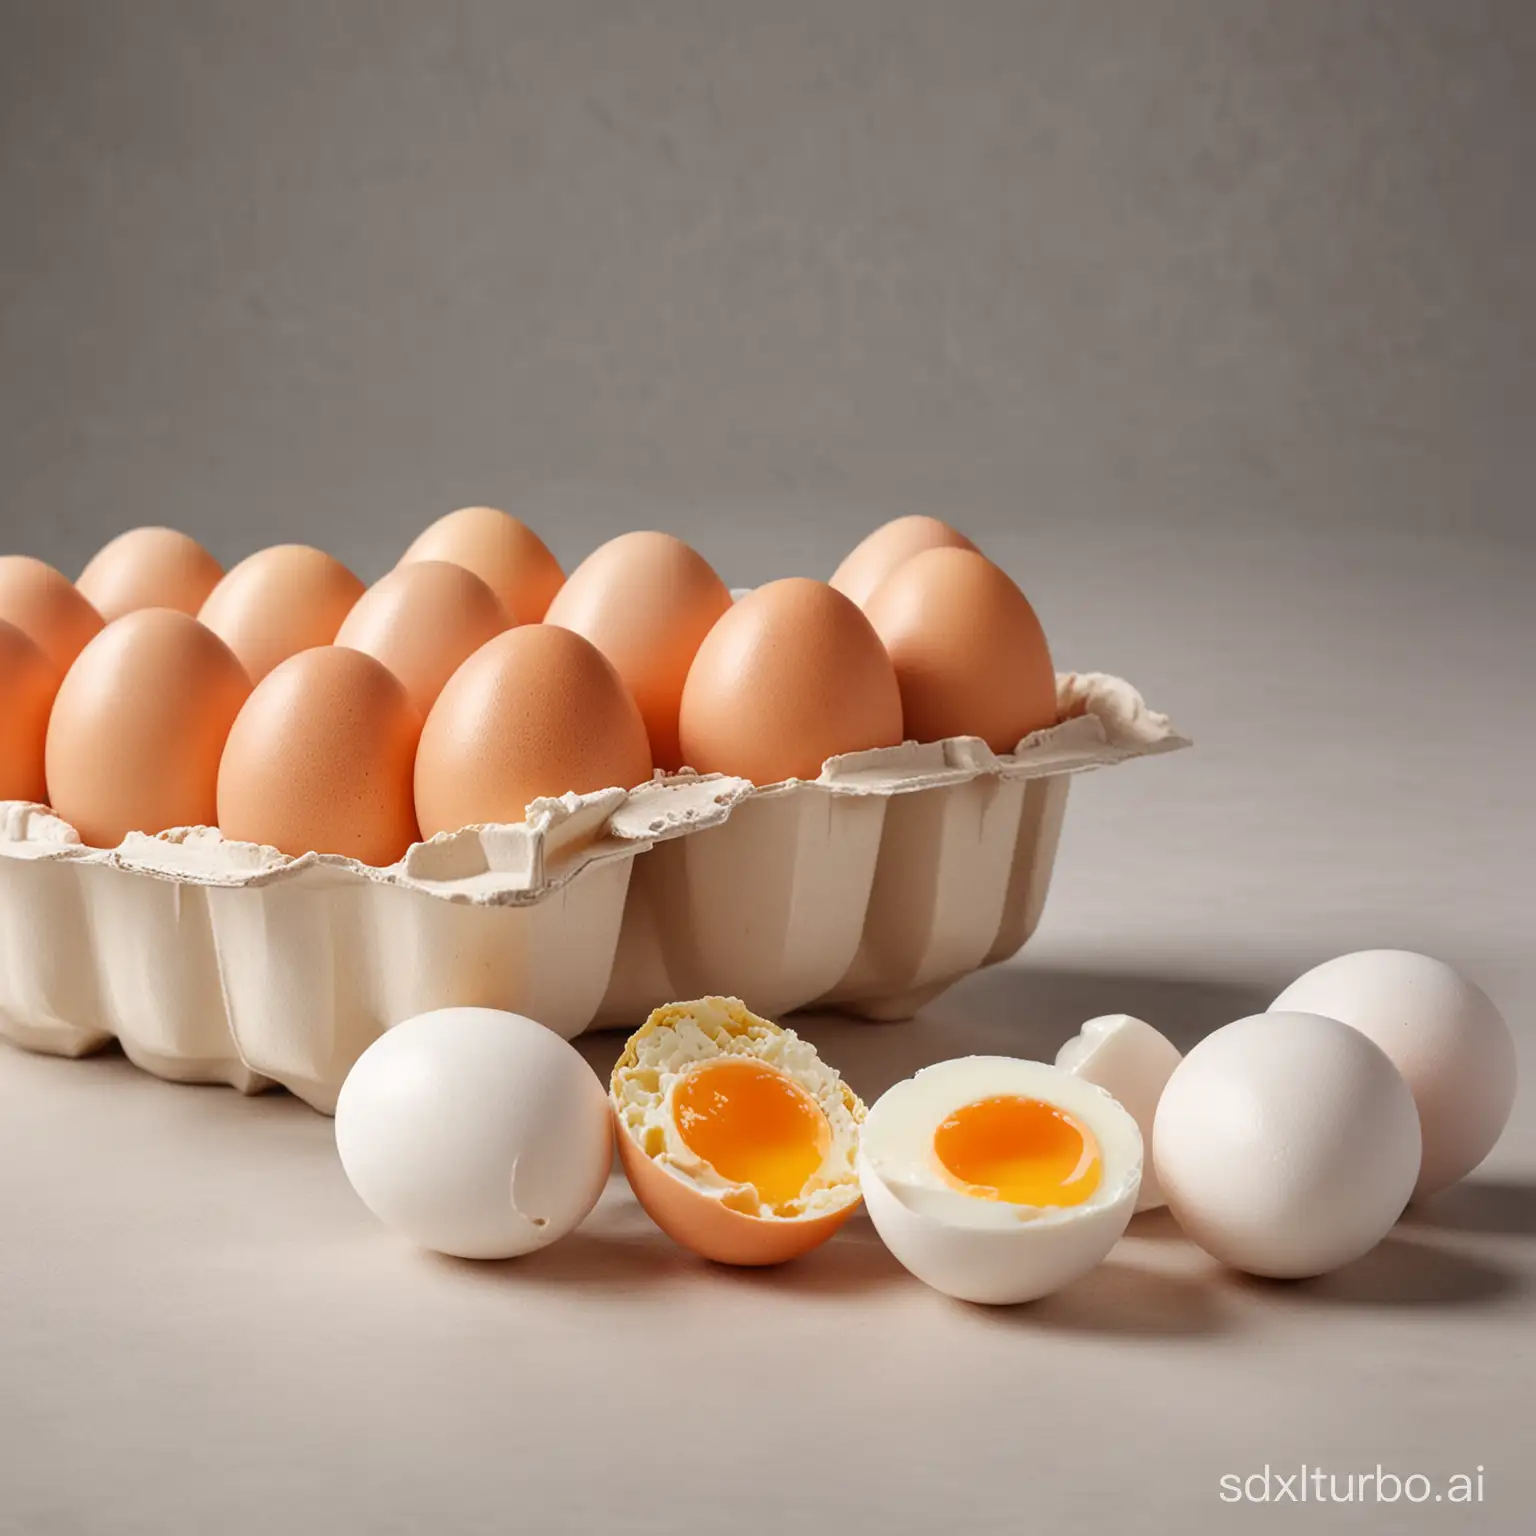 Realistic image, from the side, profesional product photography, whole eggs, egg whites in a bowl, yolks separated, egg cartons, on a neutral background